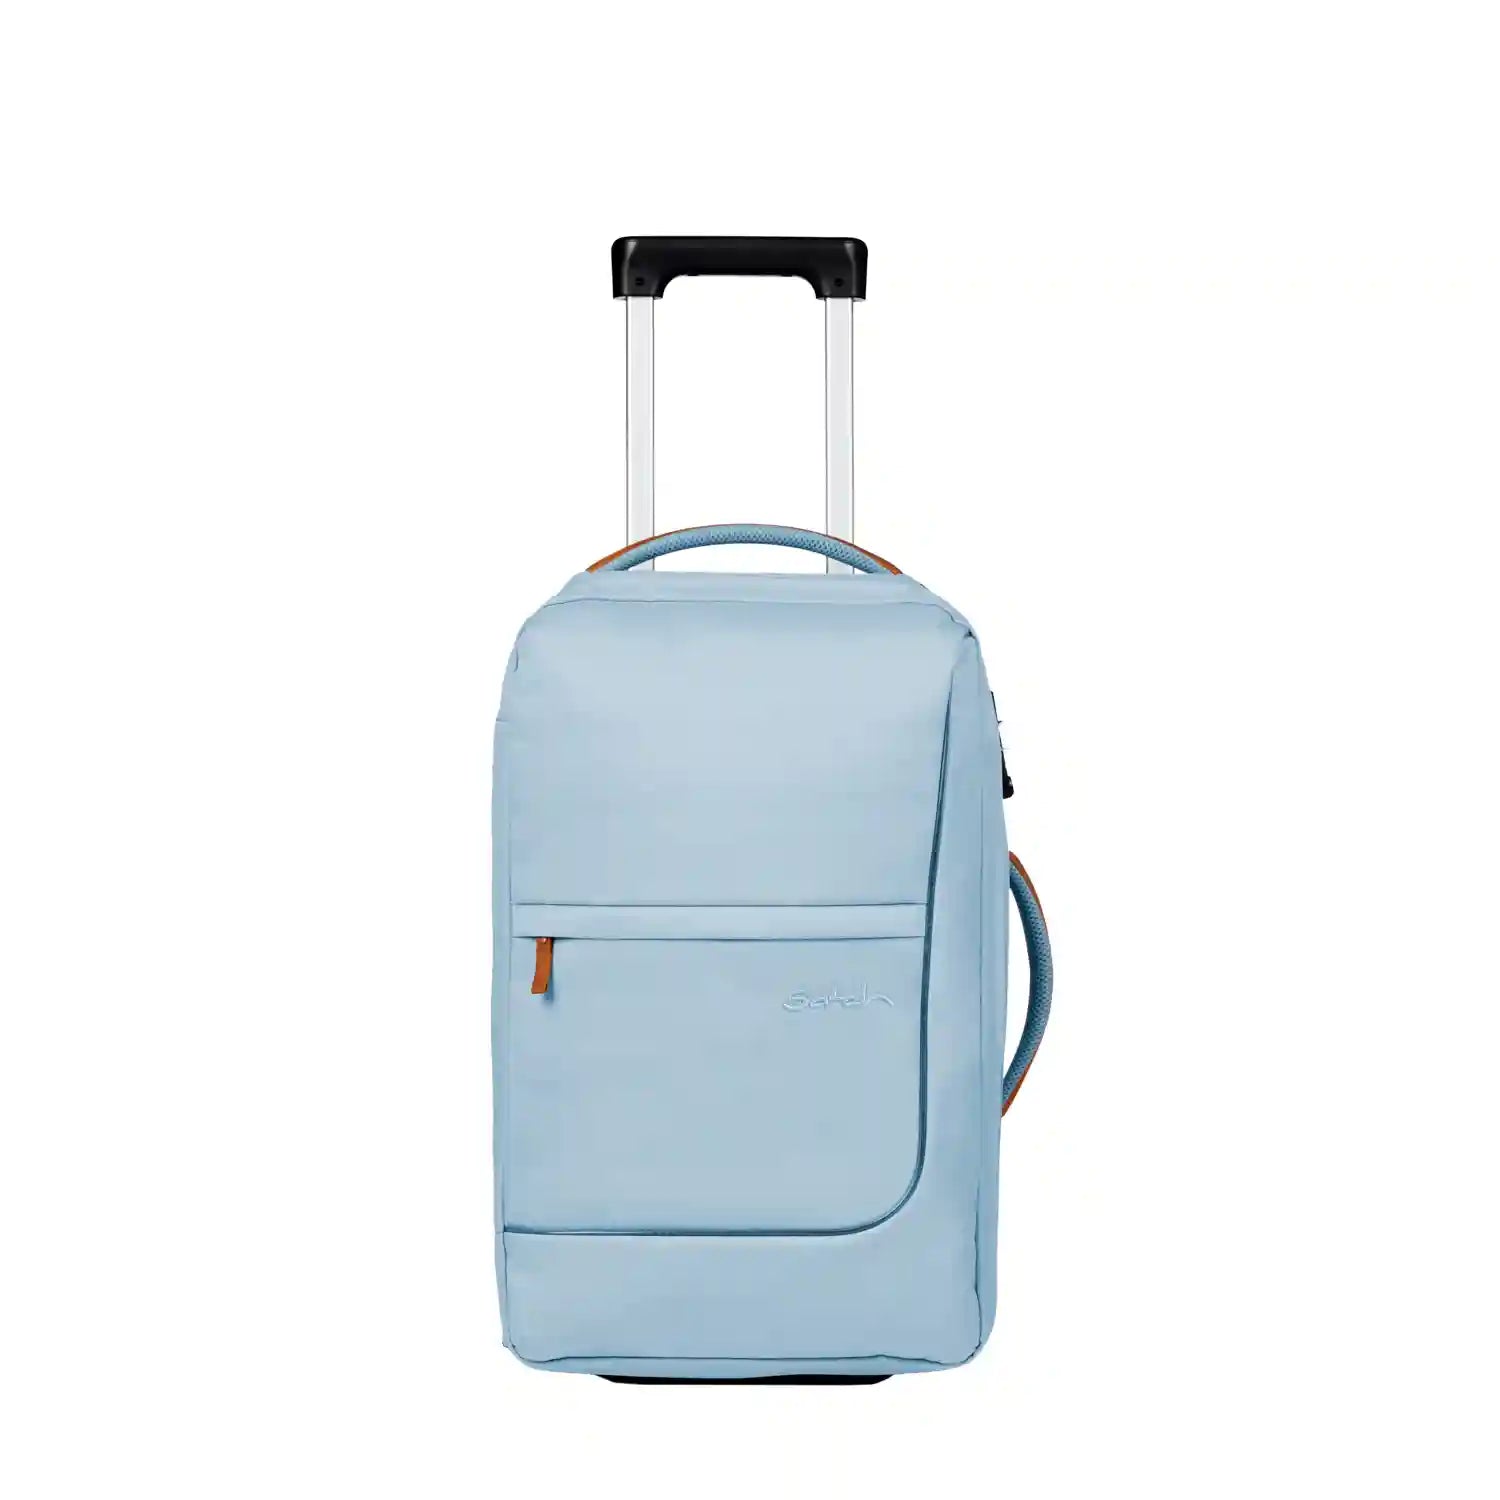 Satch Flow S Kindertrolley 54 cm - Pure Ice Blue